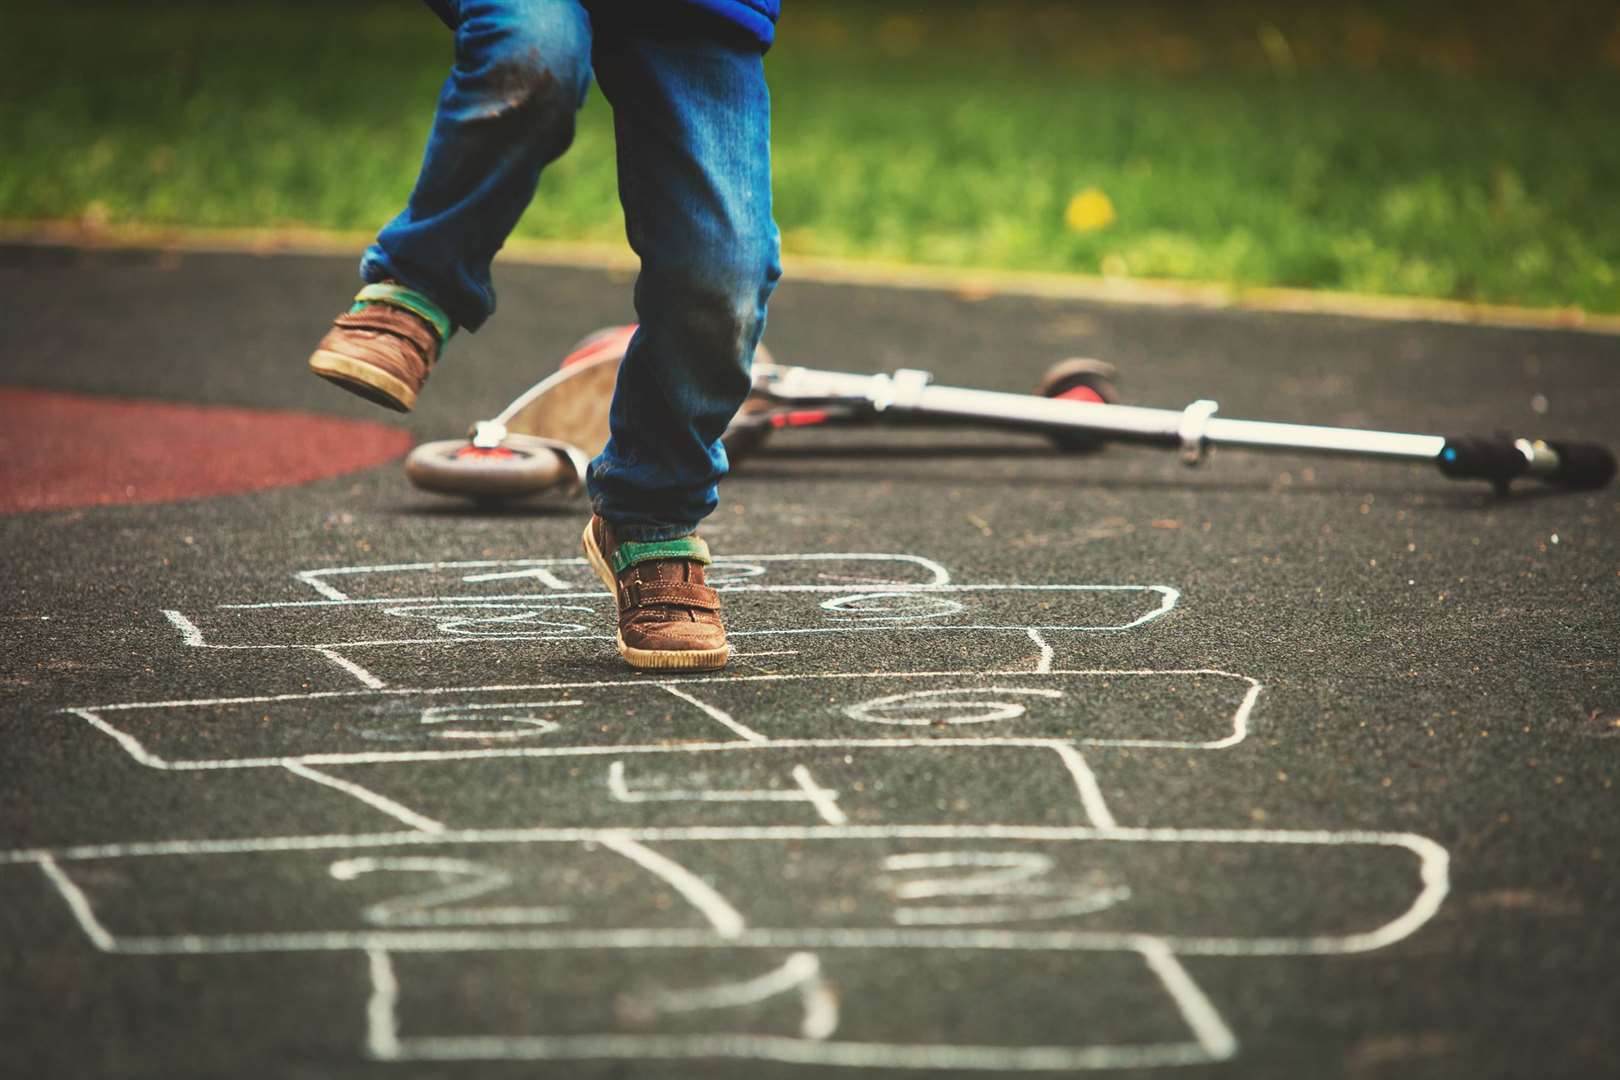 Hopscotch and other games marked out with chalk on street pavements were popular in the 80s and 90s